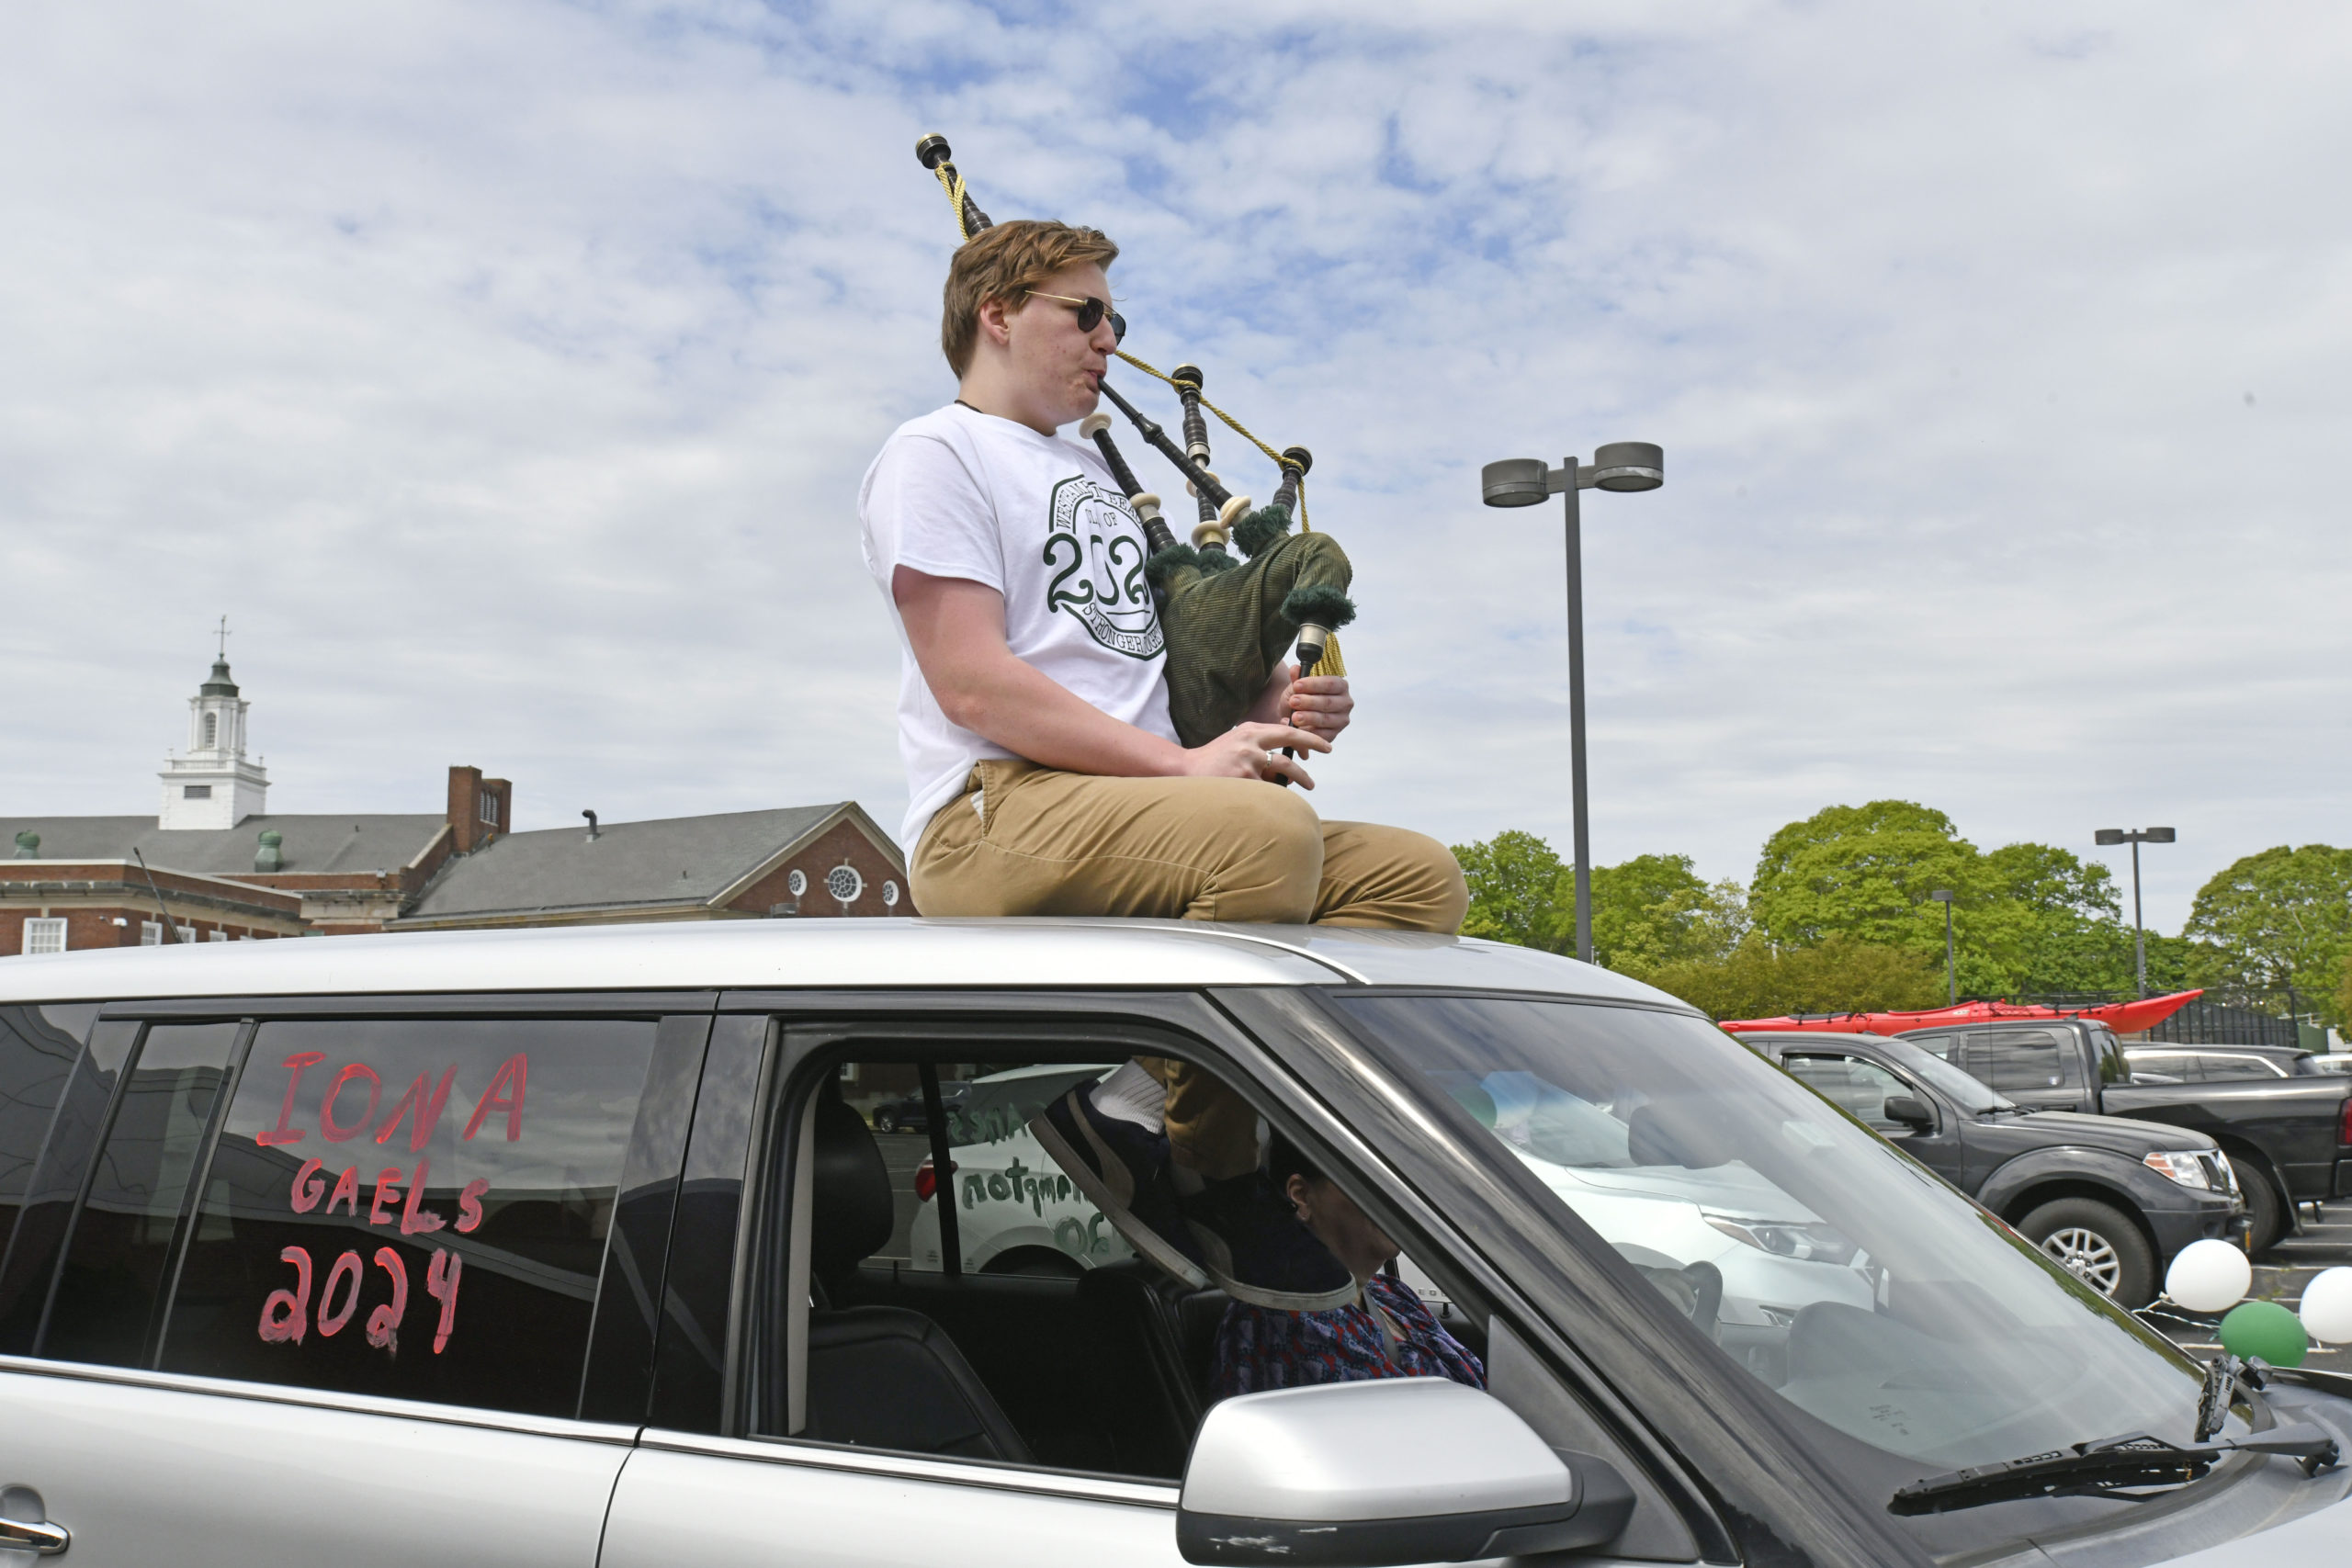 Westhampton Beach High School hosted the senior parade celebrating the Class of 2020 on Tuesday morning.